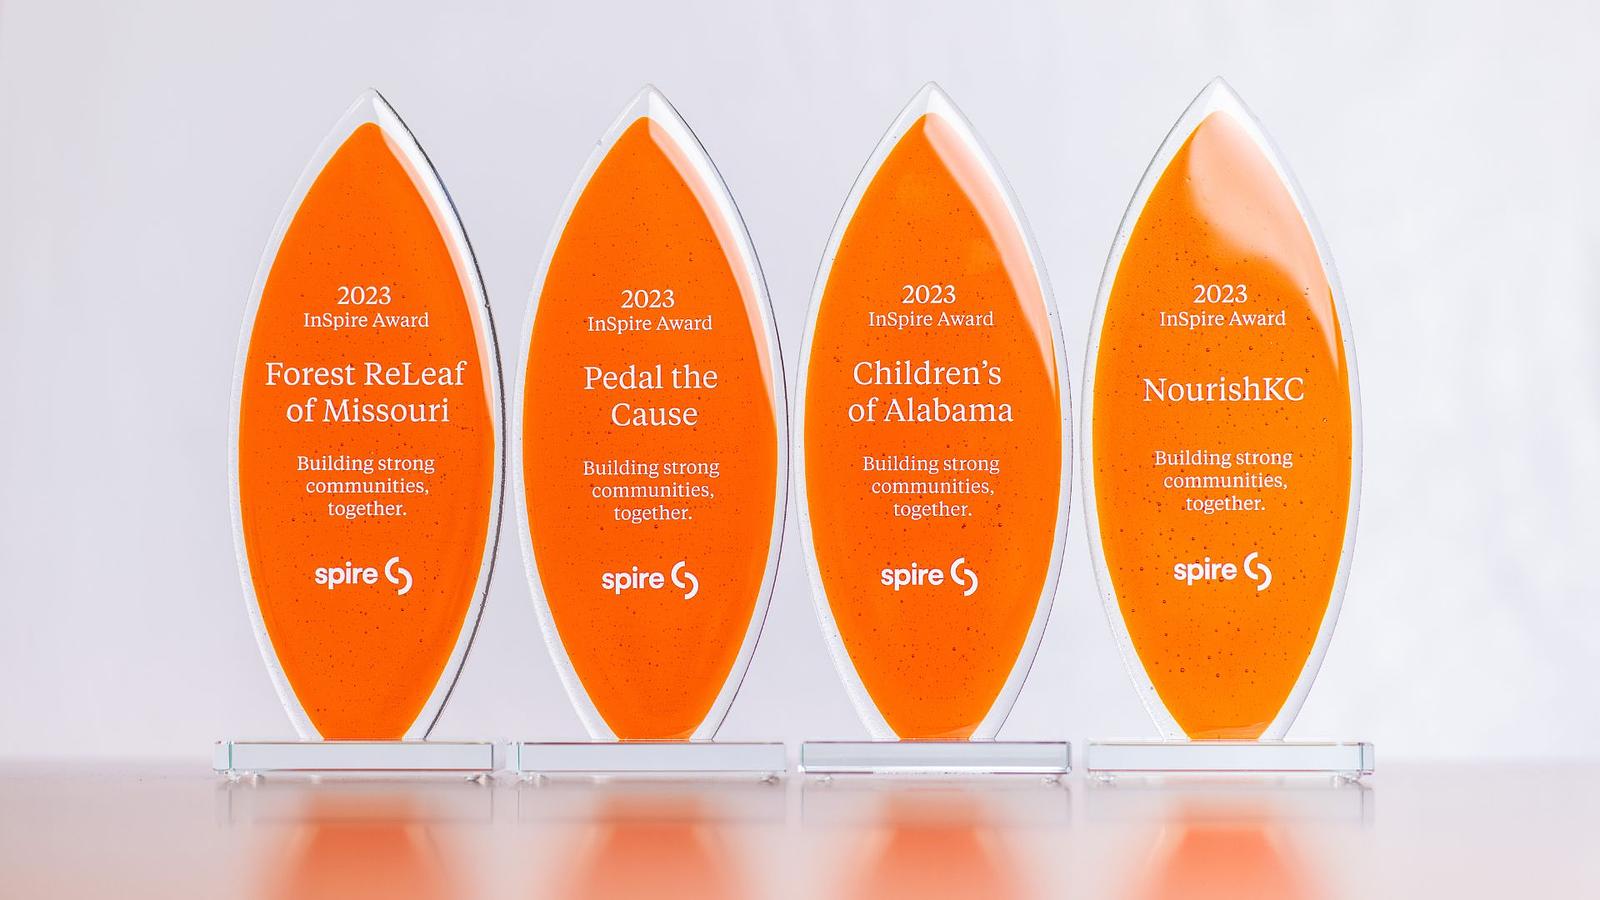 Image of four orange trophies on a white background